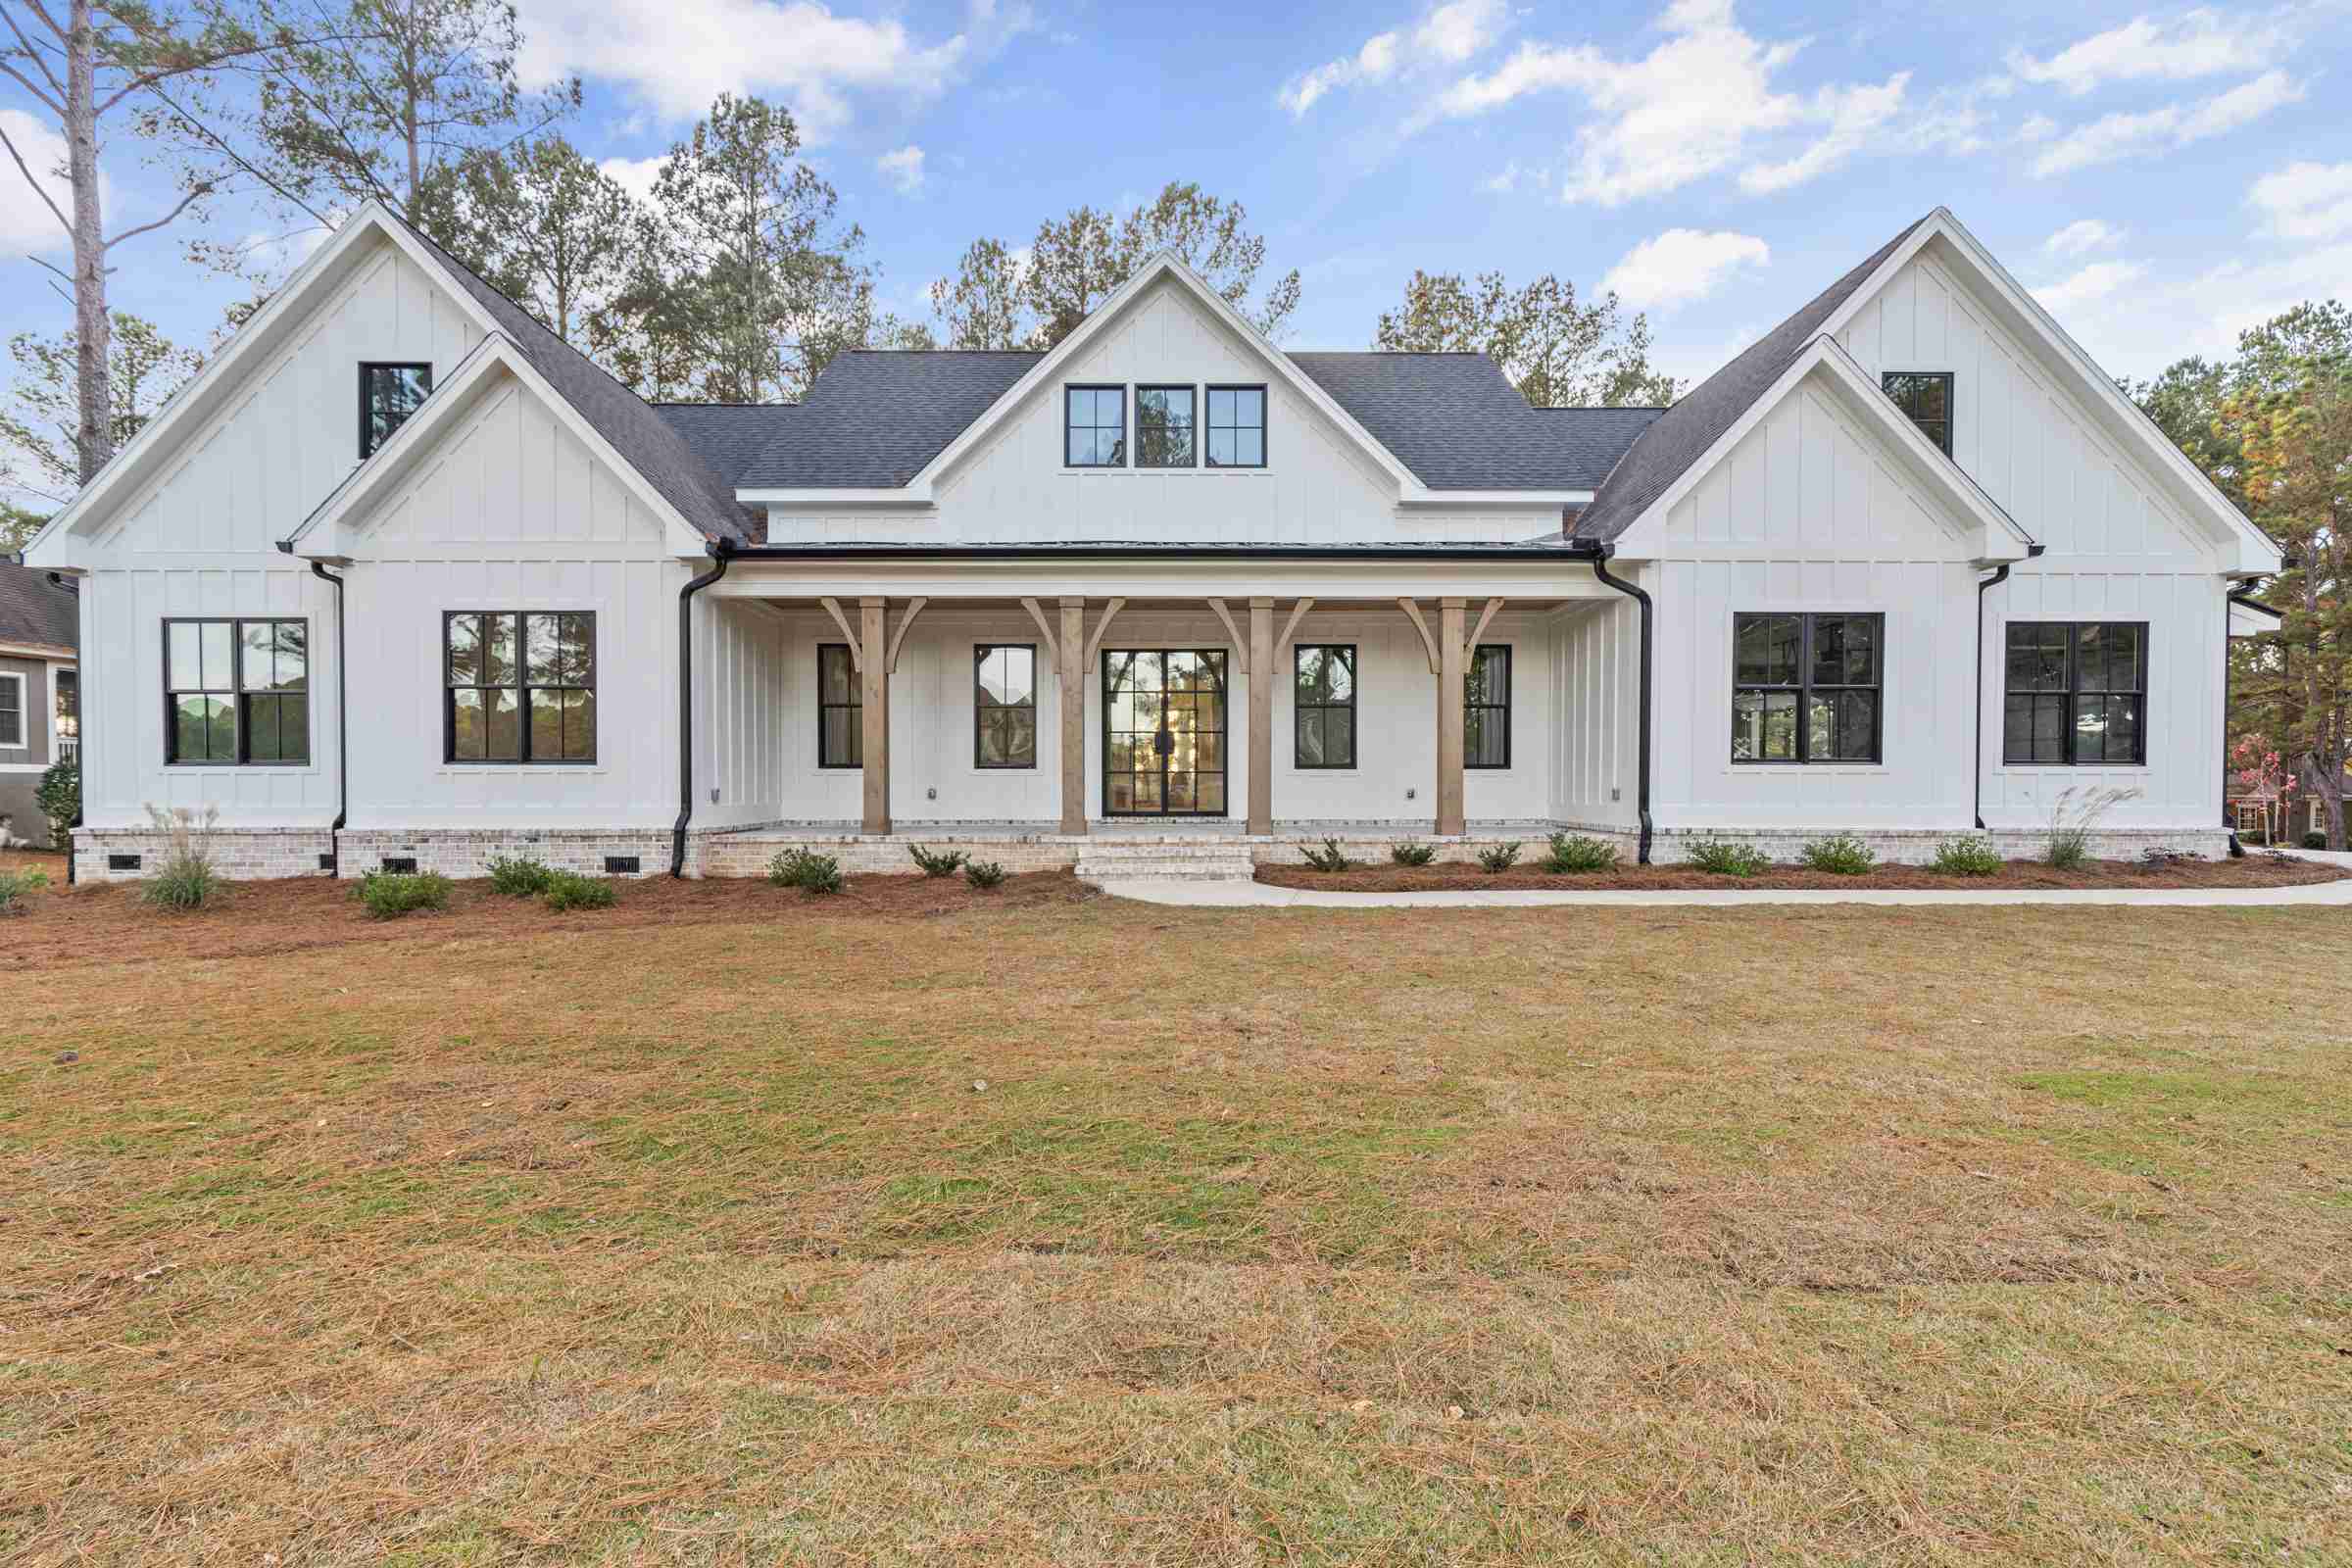 1 Paxis Indian Trail Front of custom home, front porch, white siding | Paxisgroup